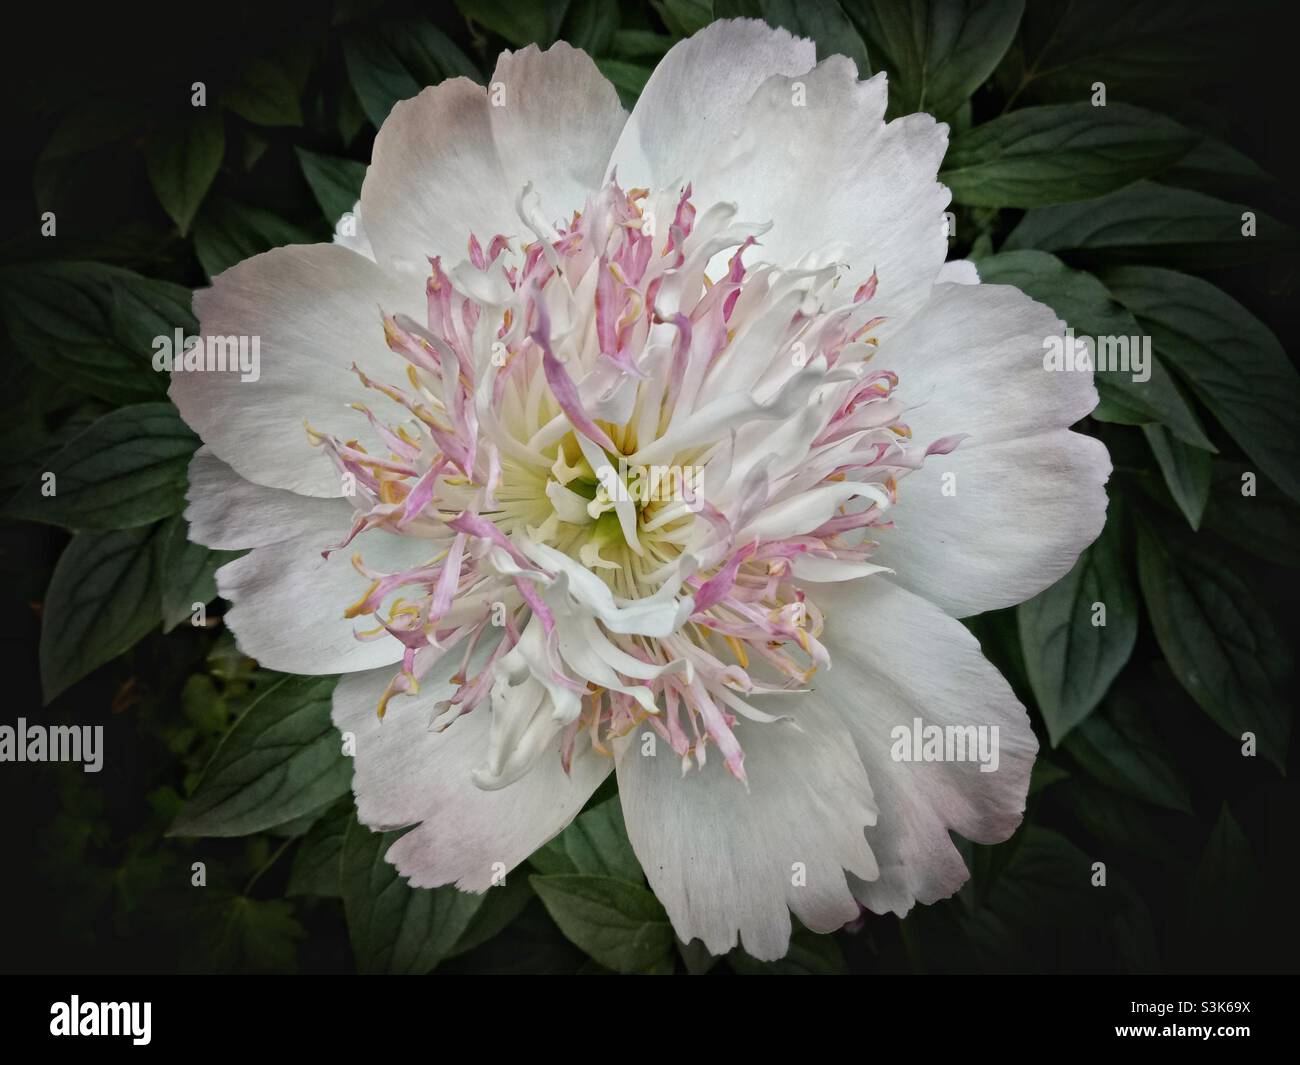 Chinese peony flower blossom with white and pink lush and petals. Stock Photo